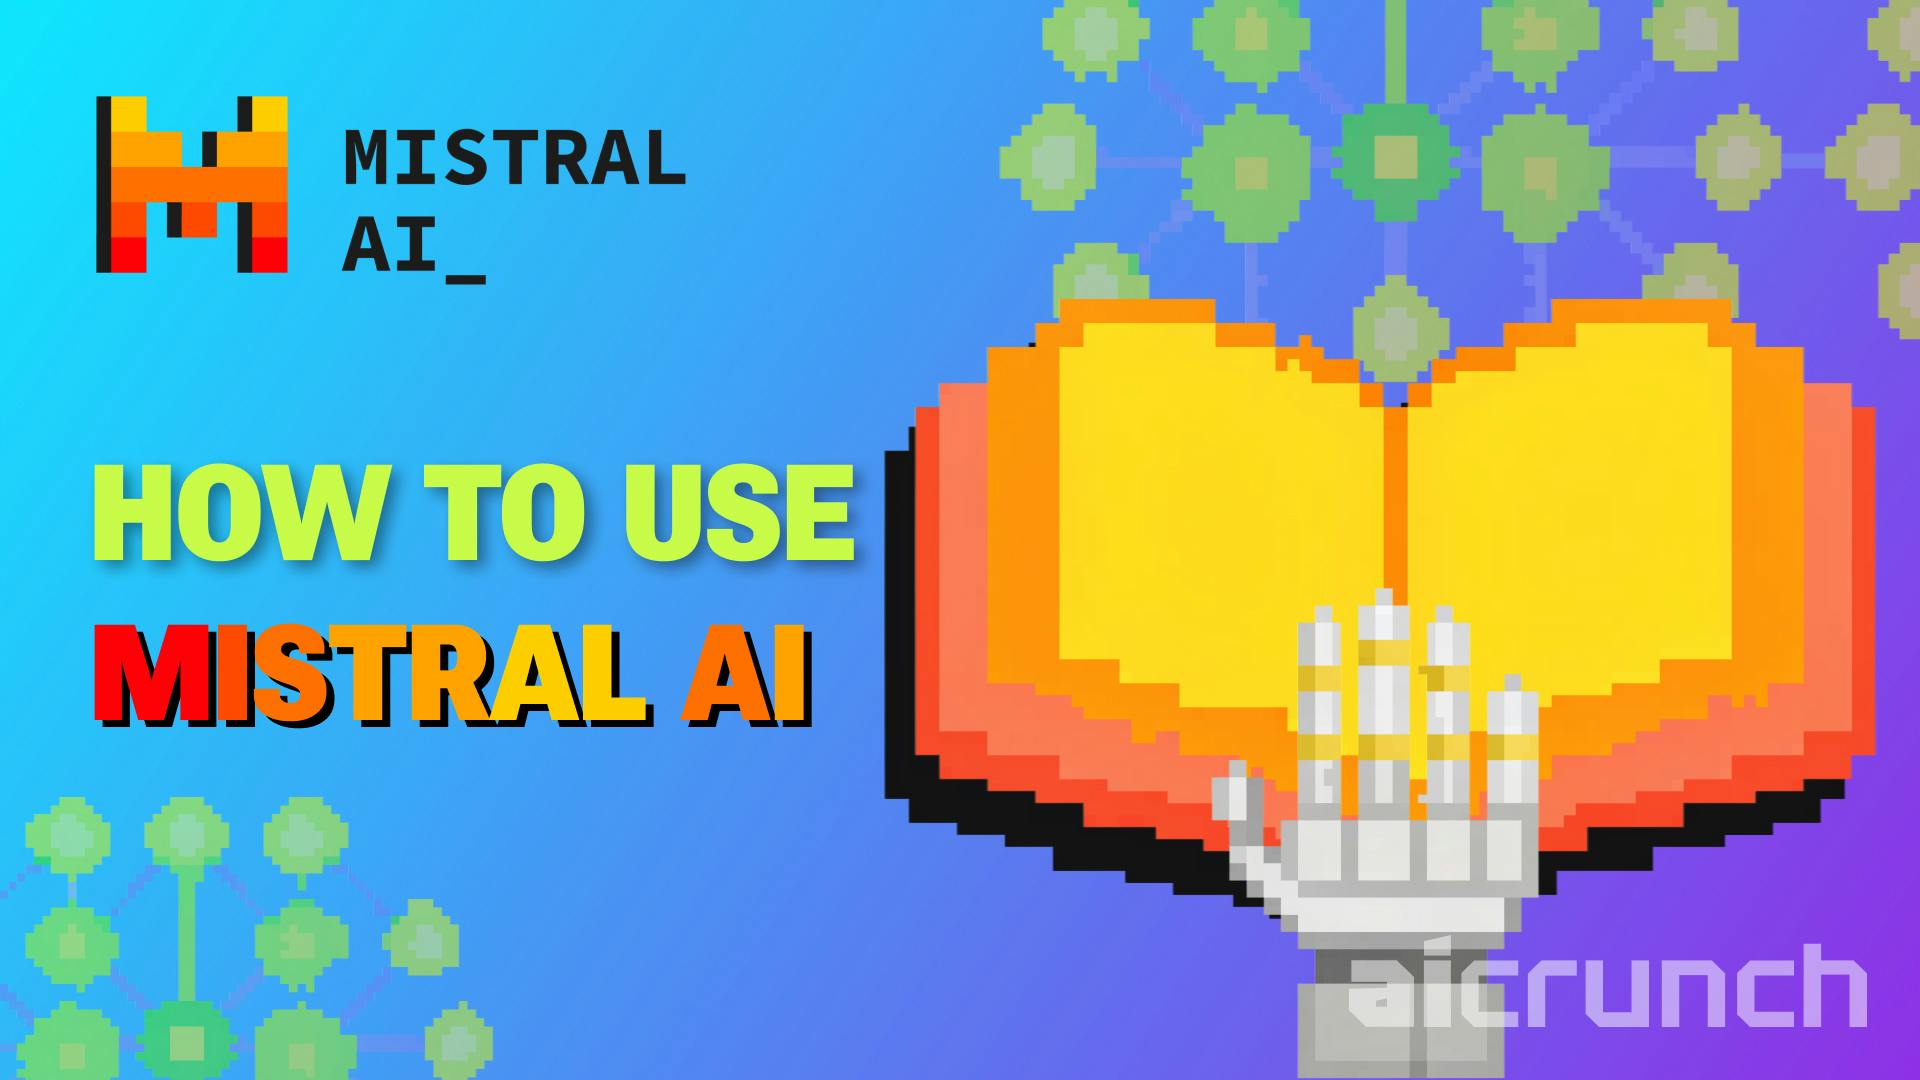 Guide to Mistral AI: How to Use Mistral AI to Improve Performance